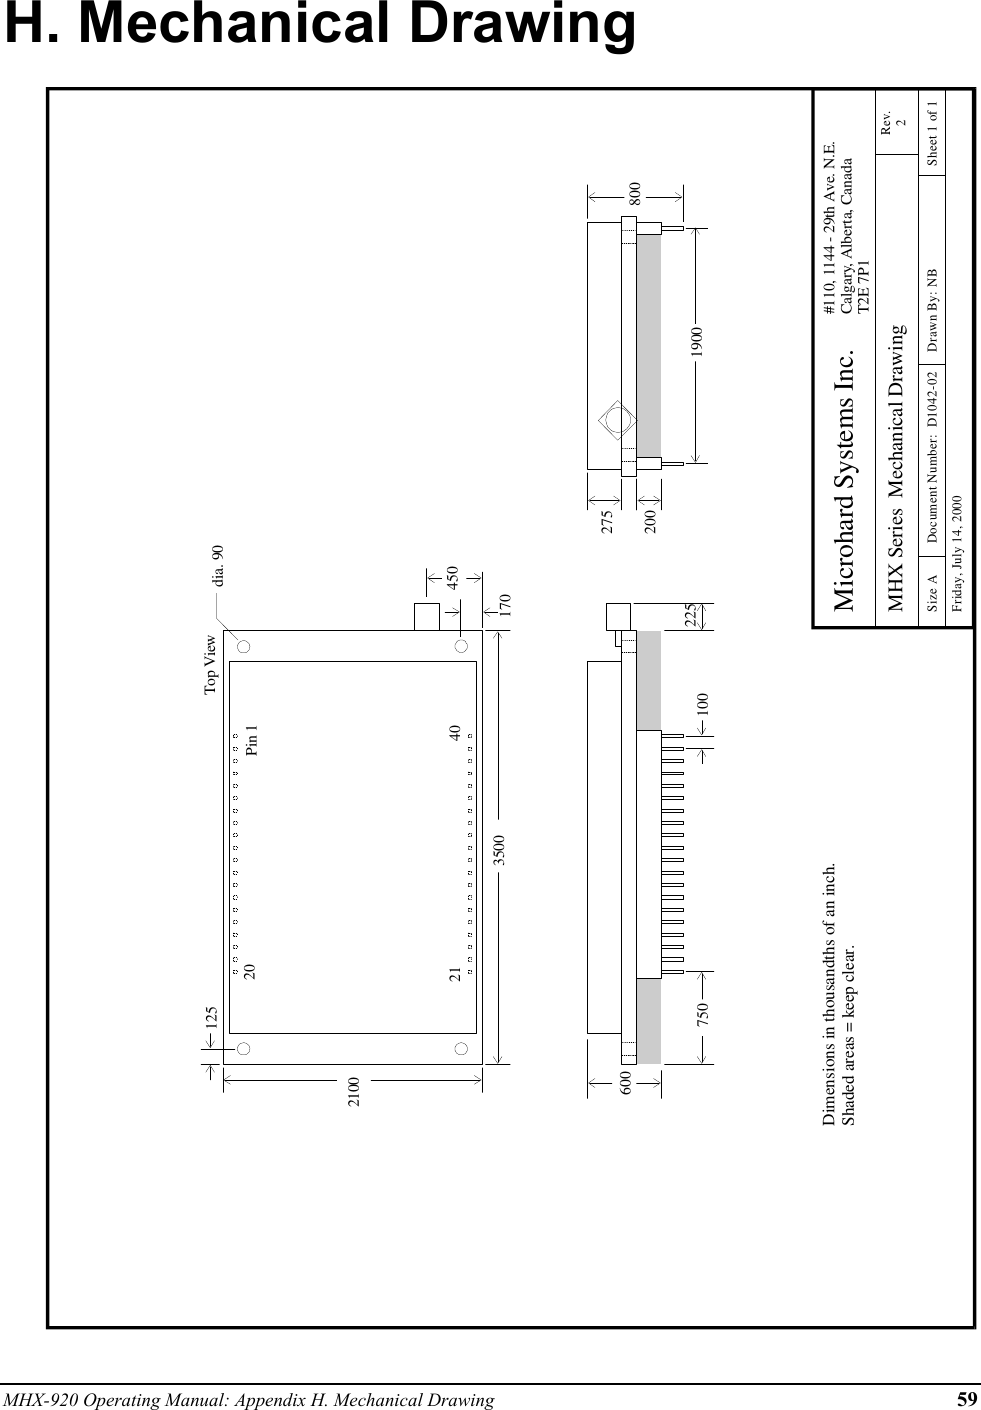 MHX-920 Operating Manual: Appendix H. Mechanical Drawing 59H. Mechanical Drawing21003500dia. 901701254507506001900100 225200275Dimensions in thousandths of an inch.Shaded areas = keep clear. Microhard Systems Inc.MHX Series  Mechanical Drawing#110, 1144 - 29th Ave. N.E.Calgary, Alberta, CanadaT2E 7P1Rev.2Size A Document Number:  D1042-02 Drawn By: NB Sheet 1 of 1Friday, July 14, 2000800Top ViewPin 12021 40